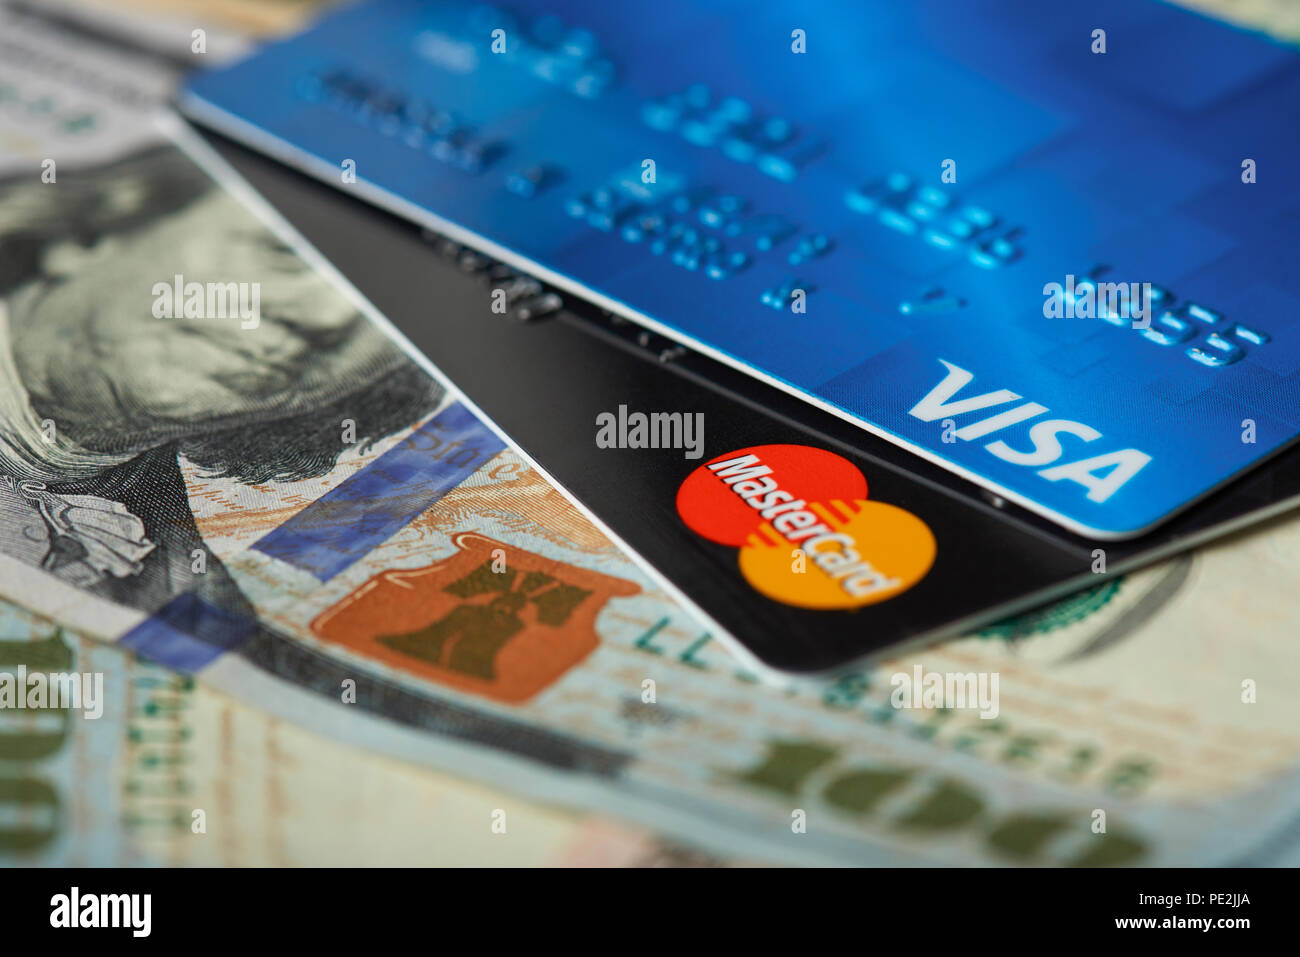 New york, USA - August 24, 2017:Close-up of visa and master card on dollar bill background. Business finance theme Stock Photo